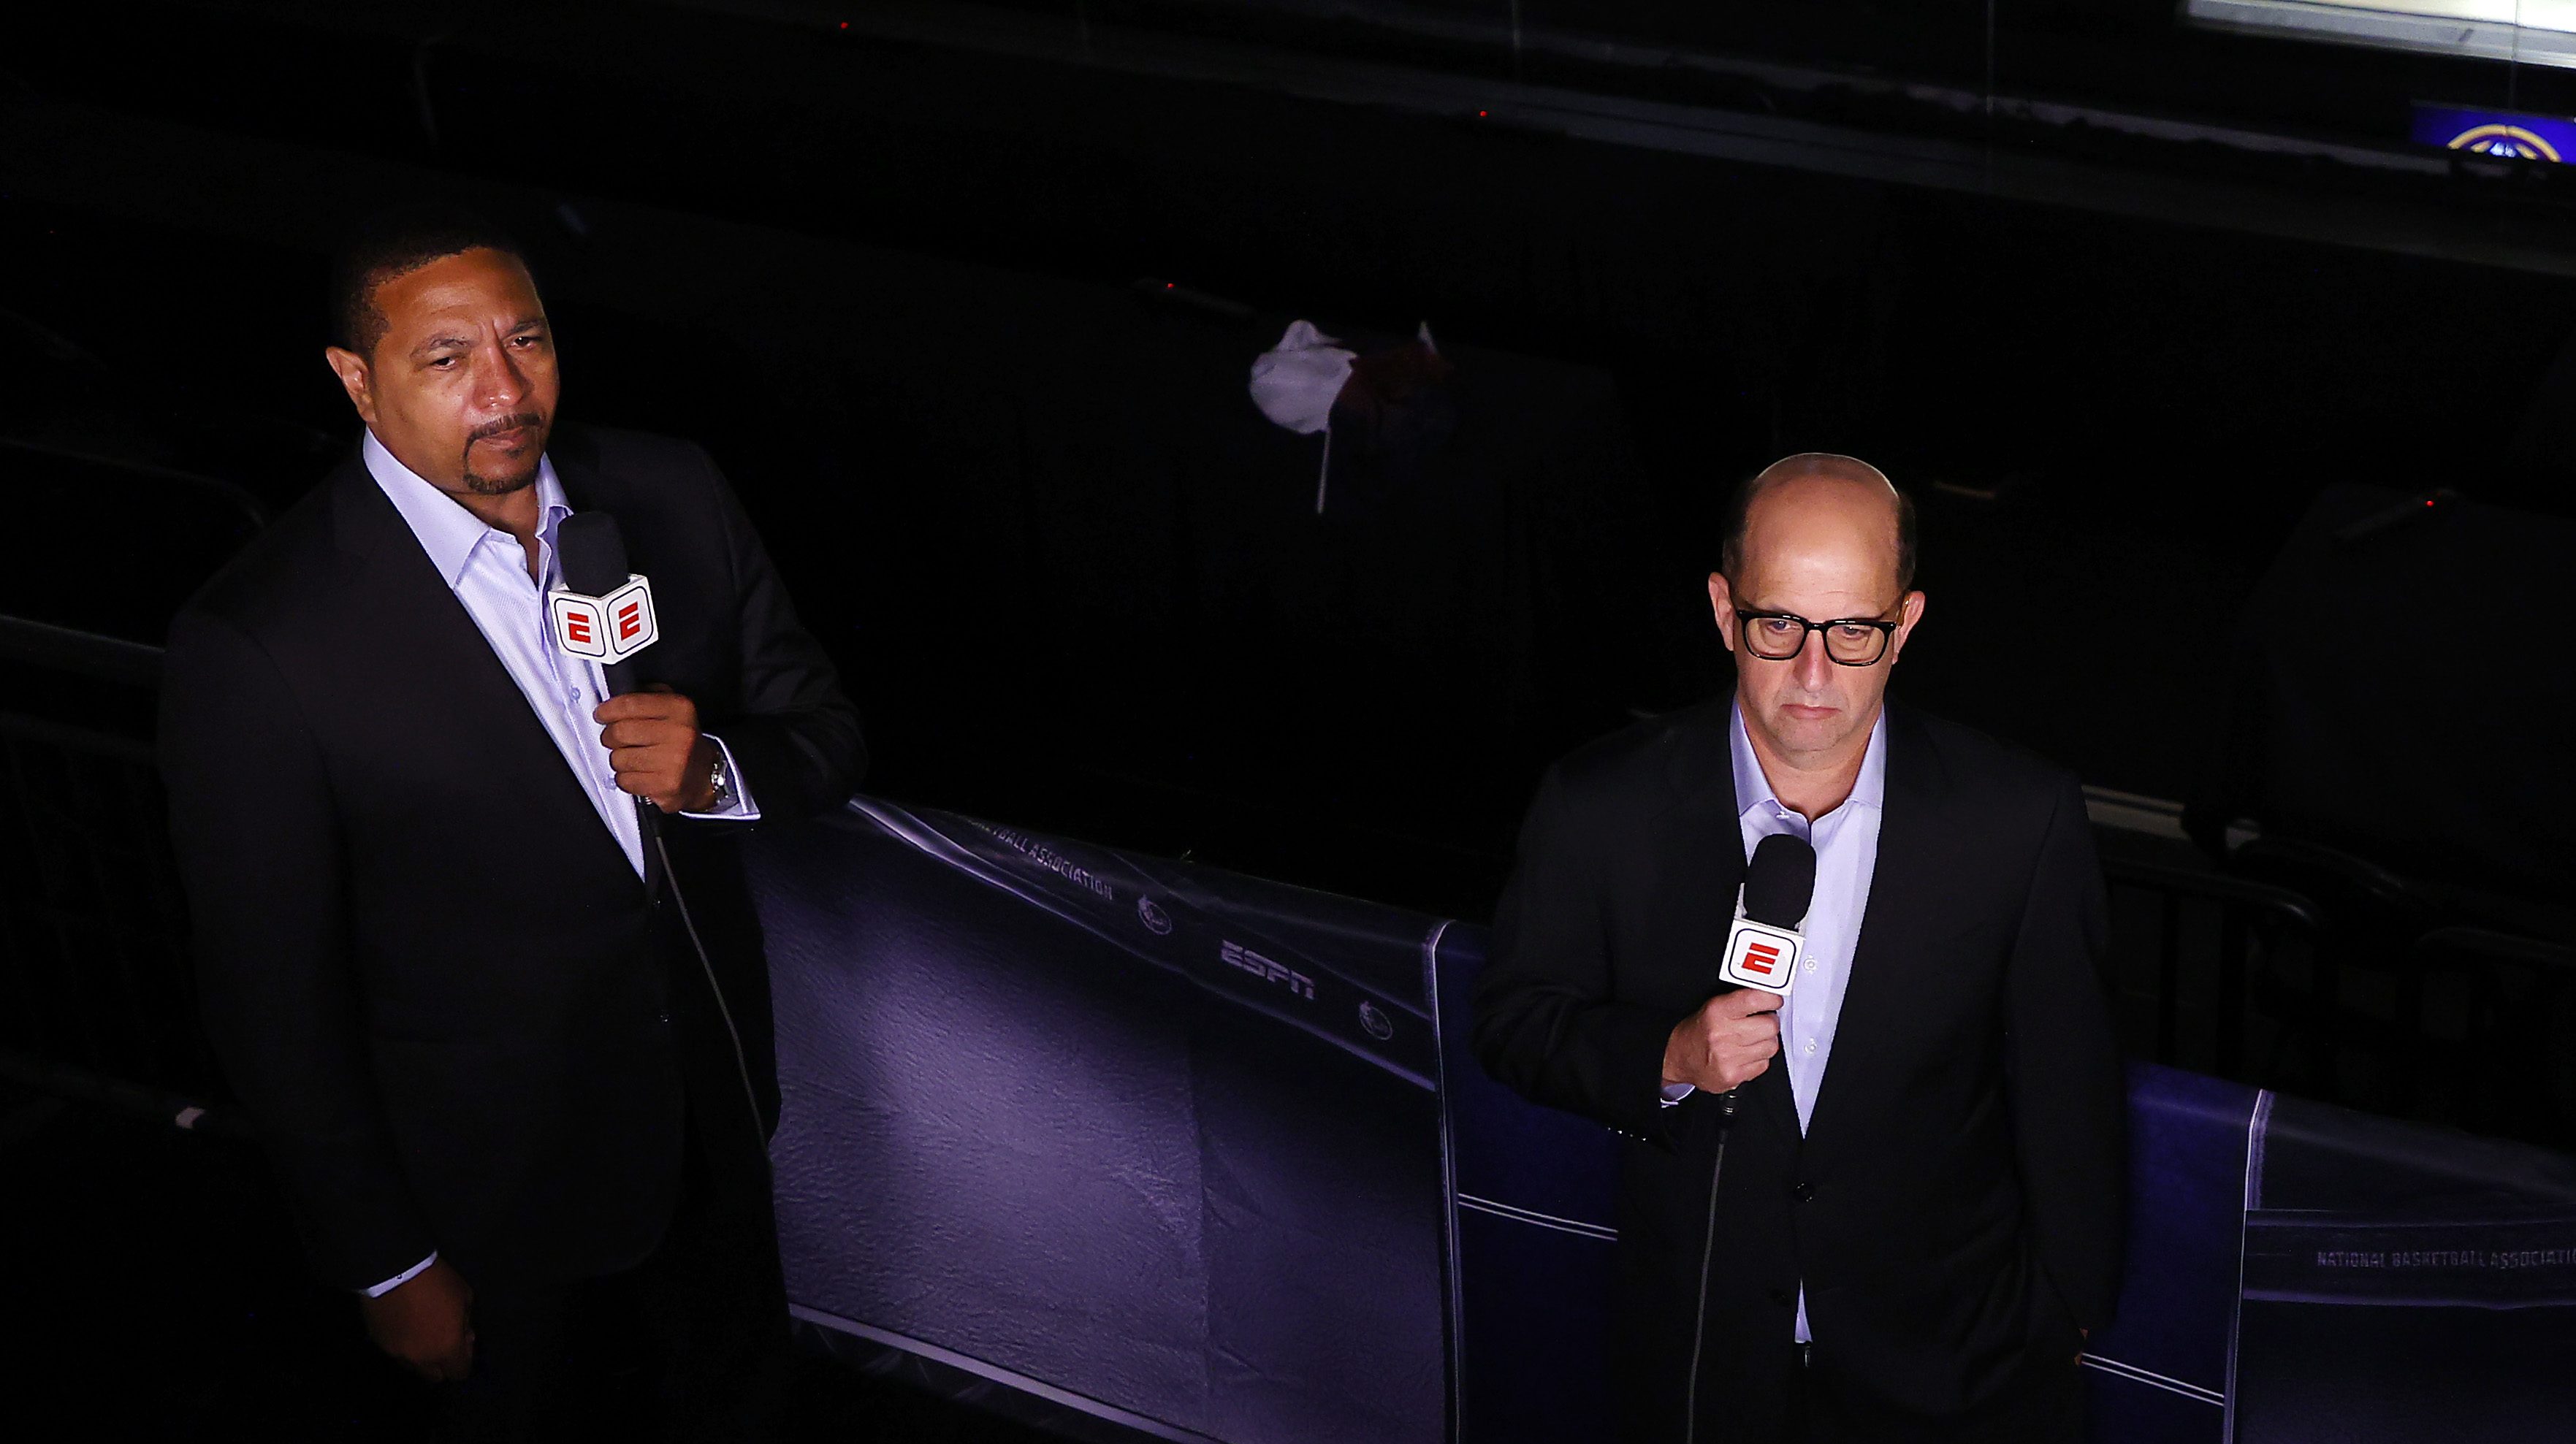 Mark Jackson and Jeff Van Gundy work the ESPN broadcast of an NBA playoff game in the Orlando bubble.